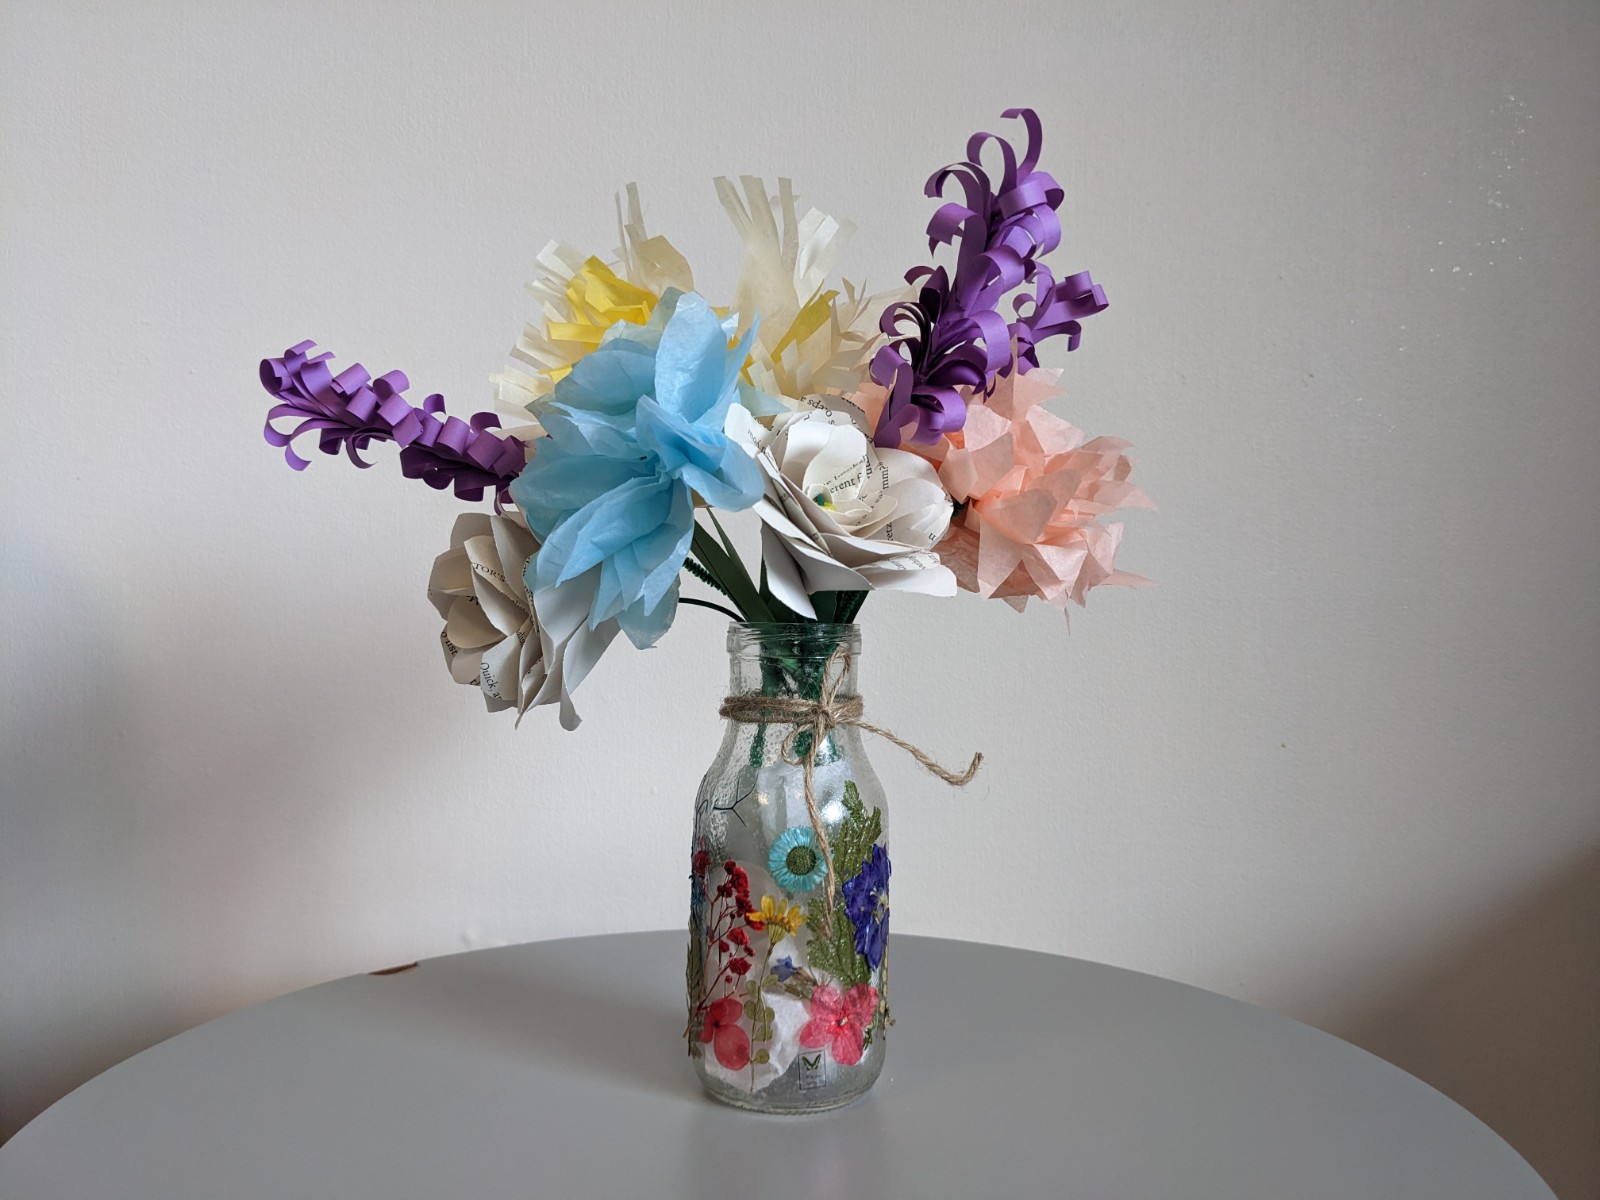 decoupage jar with pressed flowers holding tissue paper flowers in peach, yellow, and light blue, white and book paper roses, and purple paper hyacinth